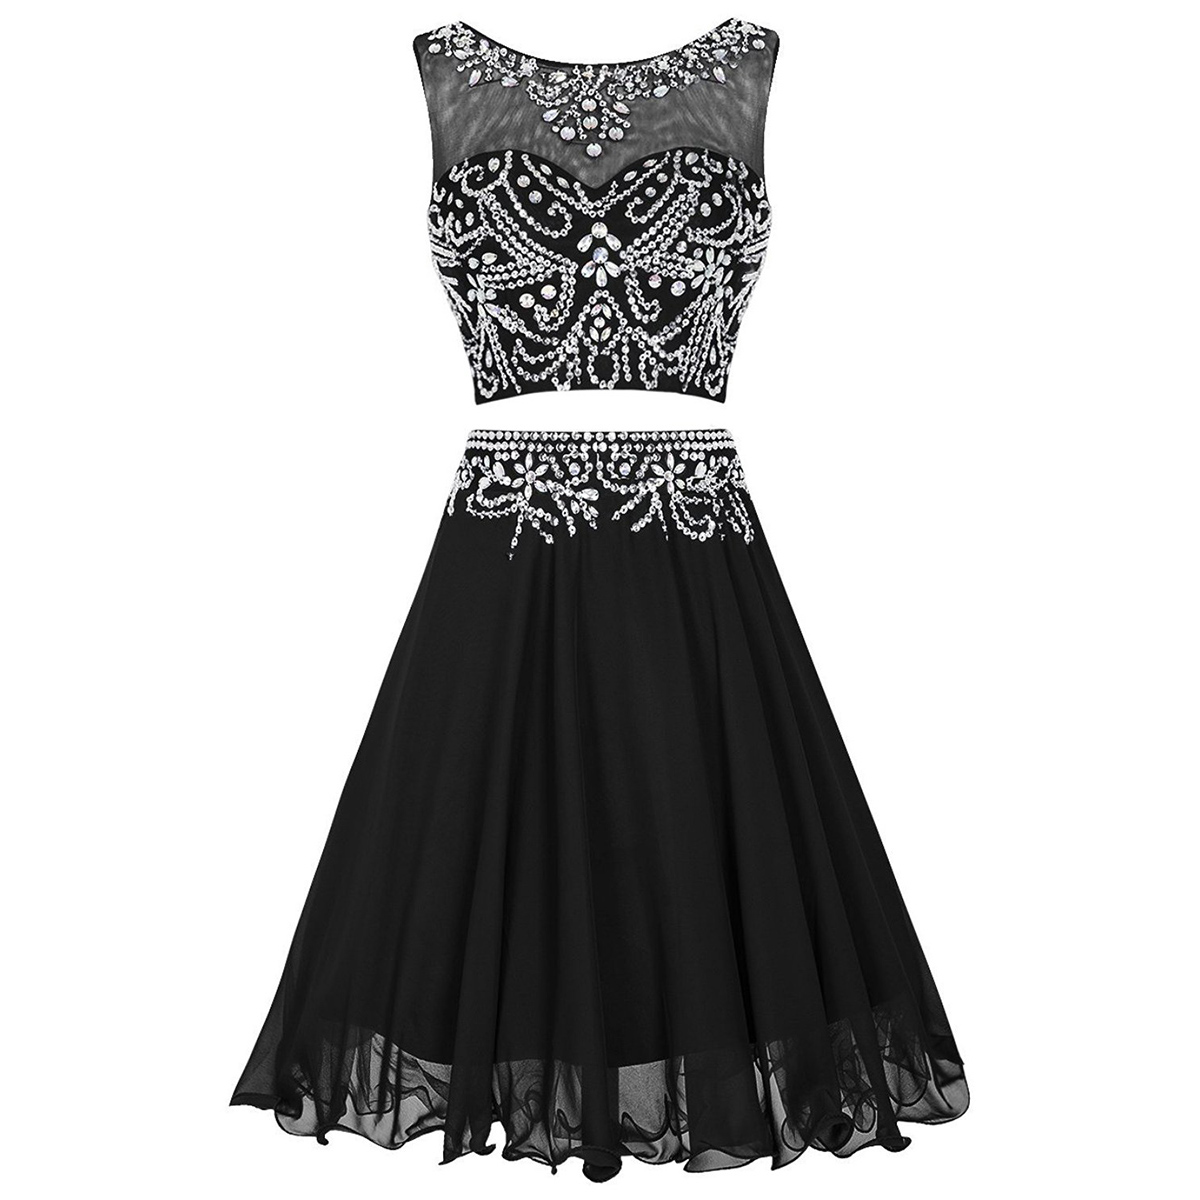 Black Two-piece Homecoming Dress, Featuring Beaded Chiffon Knee Length Skirt And Beaded Sweetheart Illusion Bodice With Keyhole Back